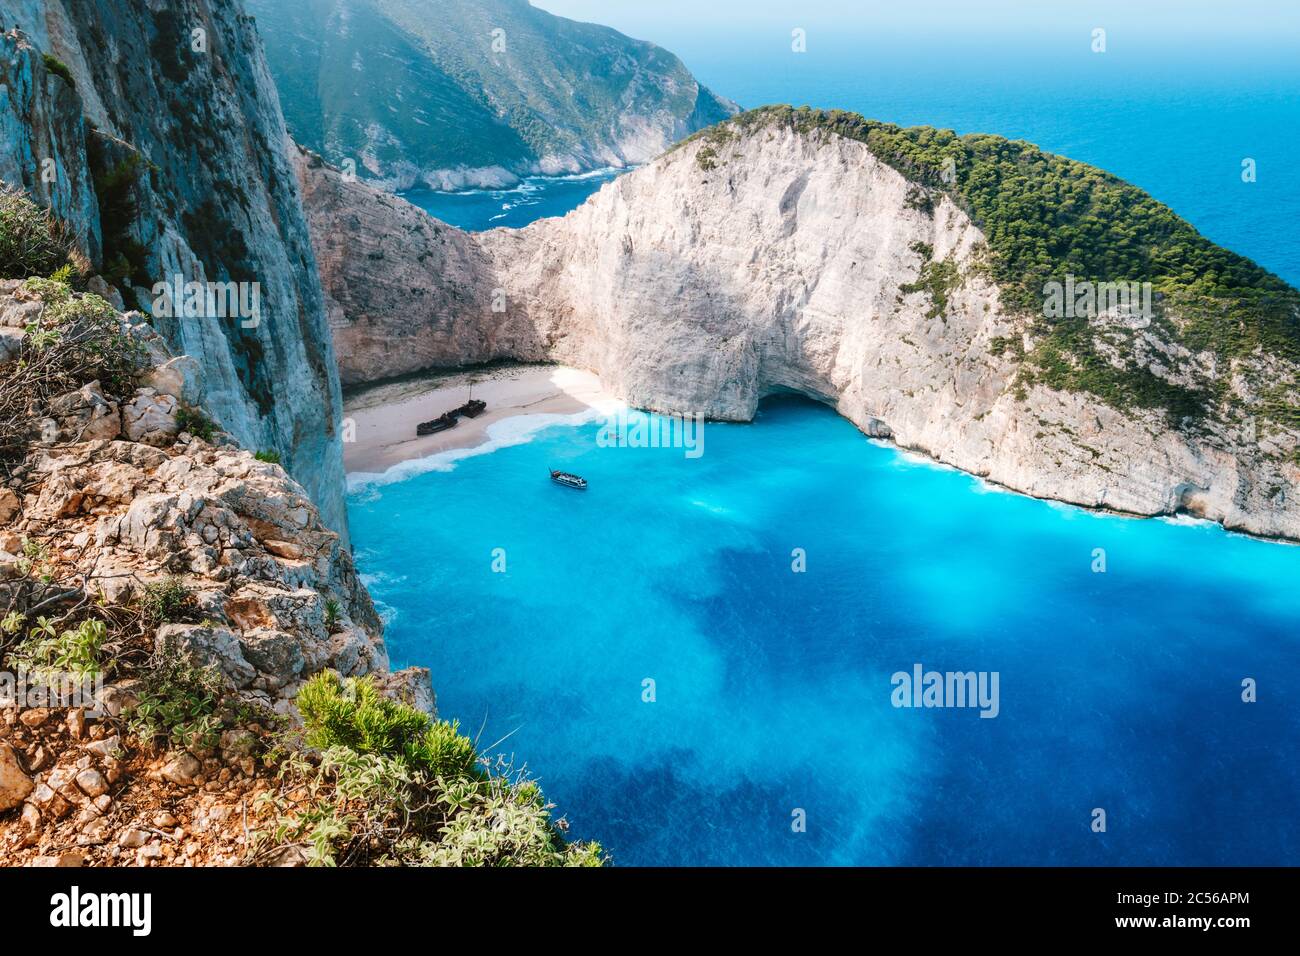 Greece, Zakynthos. Stranded panagiotis freightliner ship in navagio beach from top view. Stock Photo